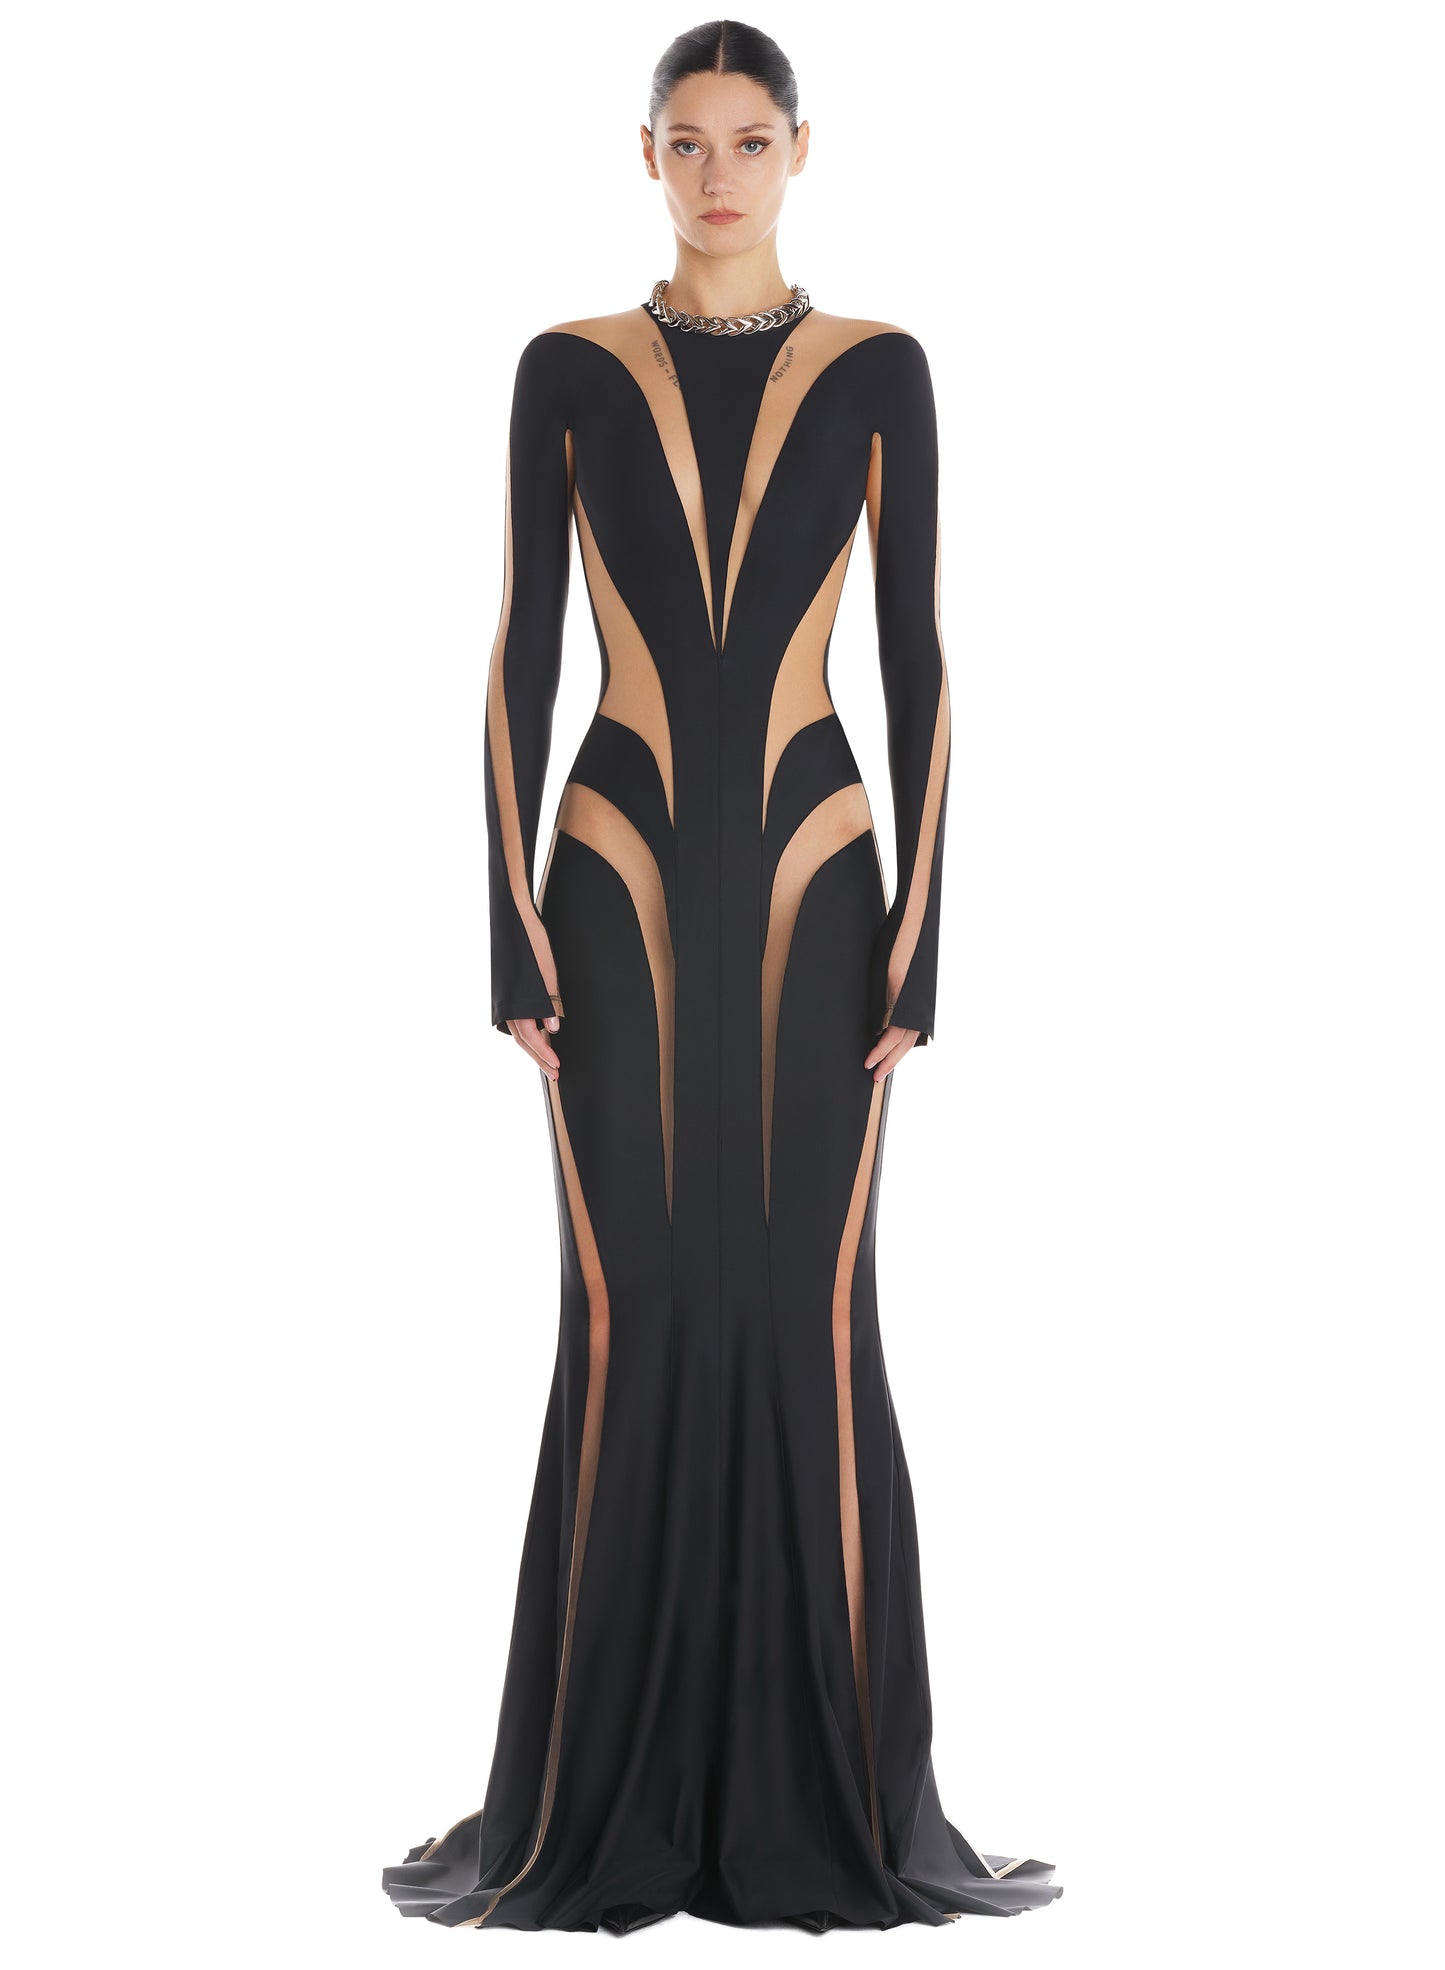 Illusion body shaping gown